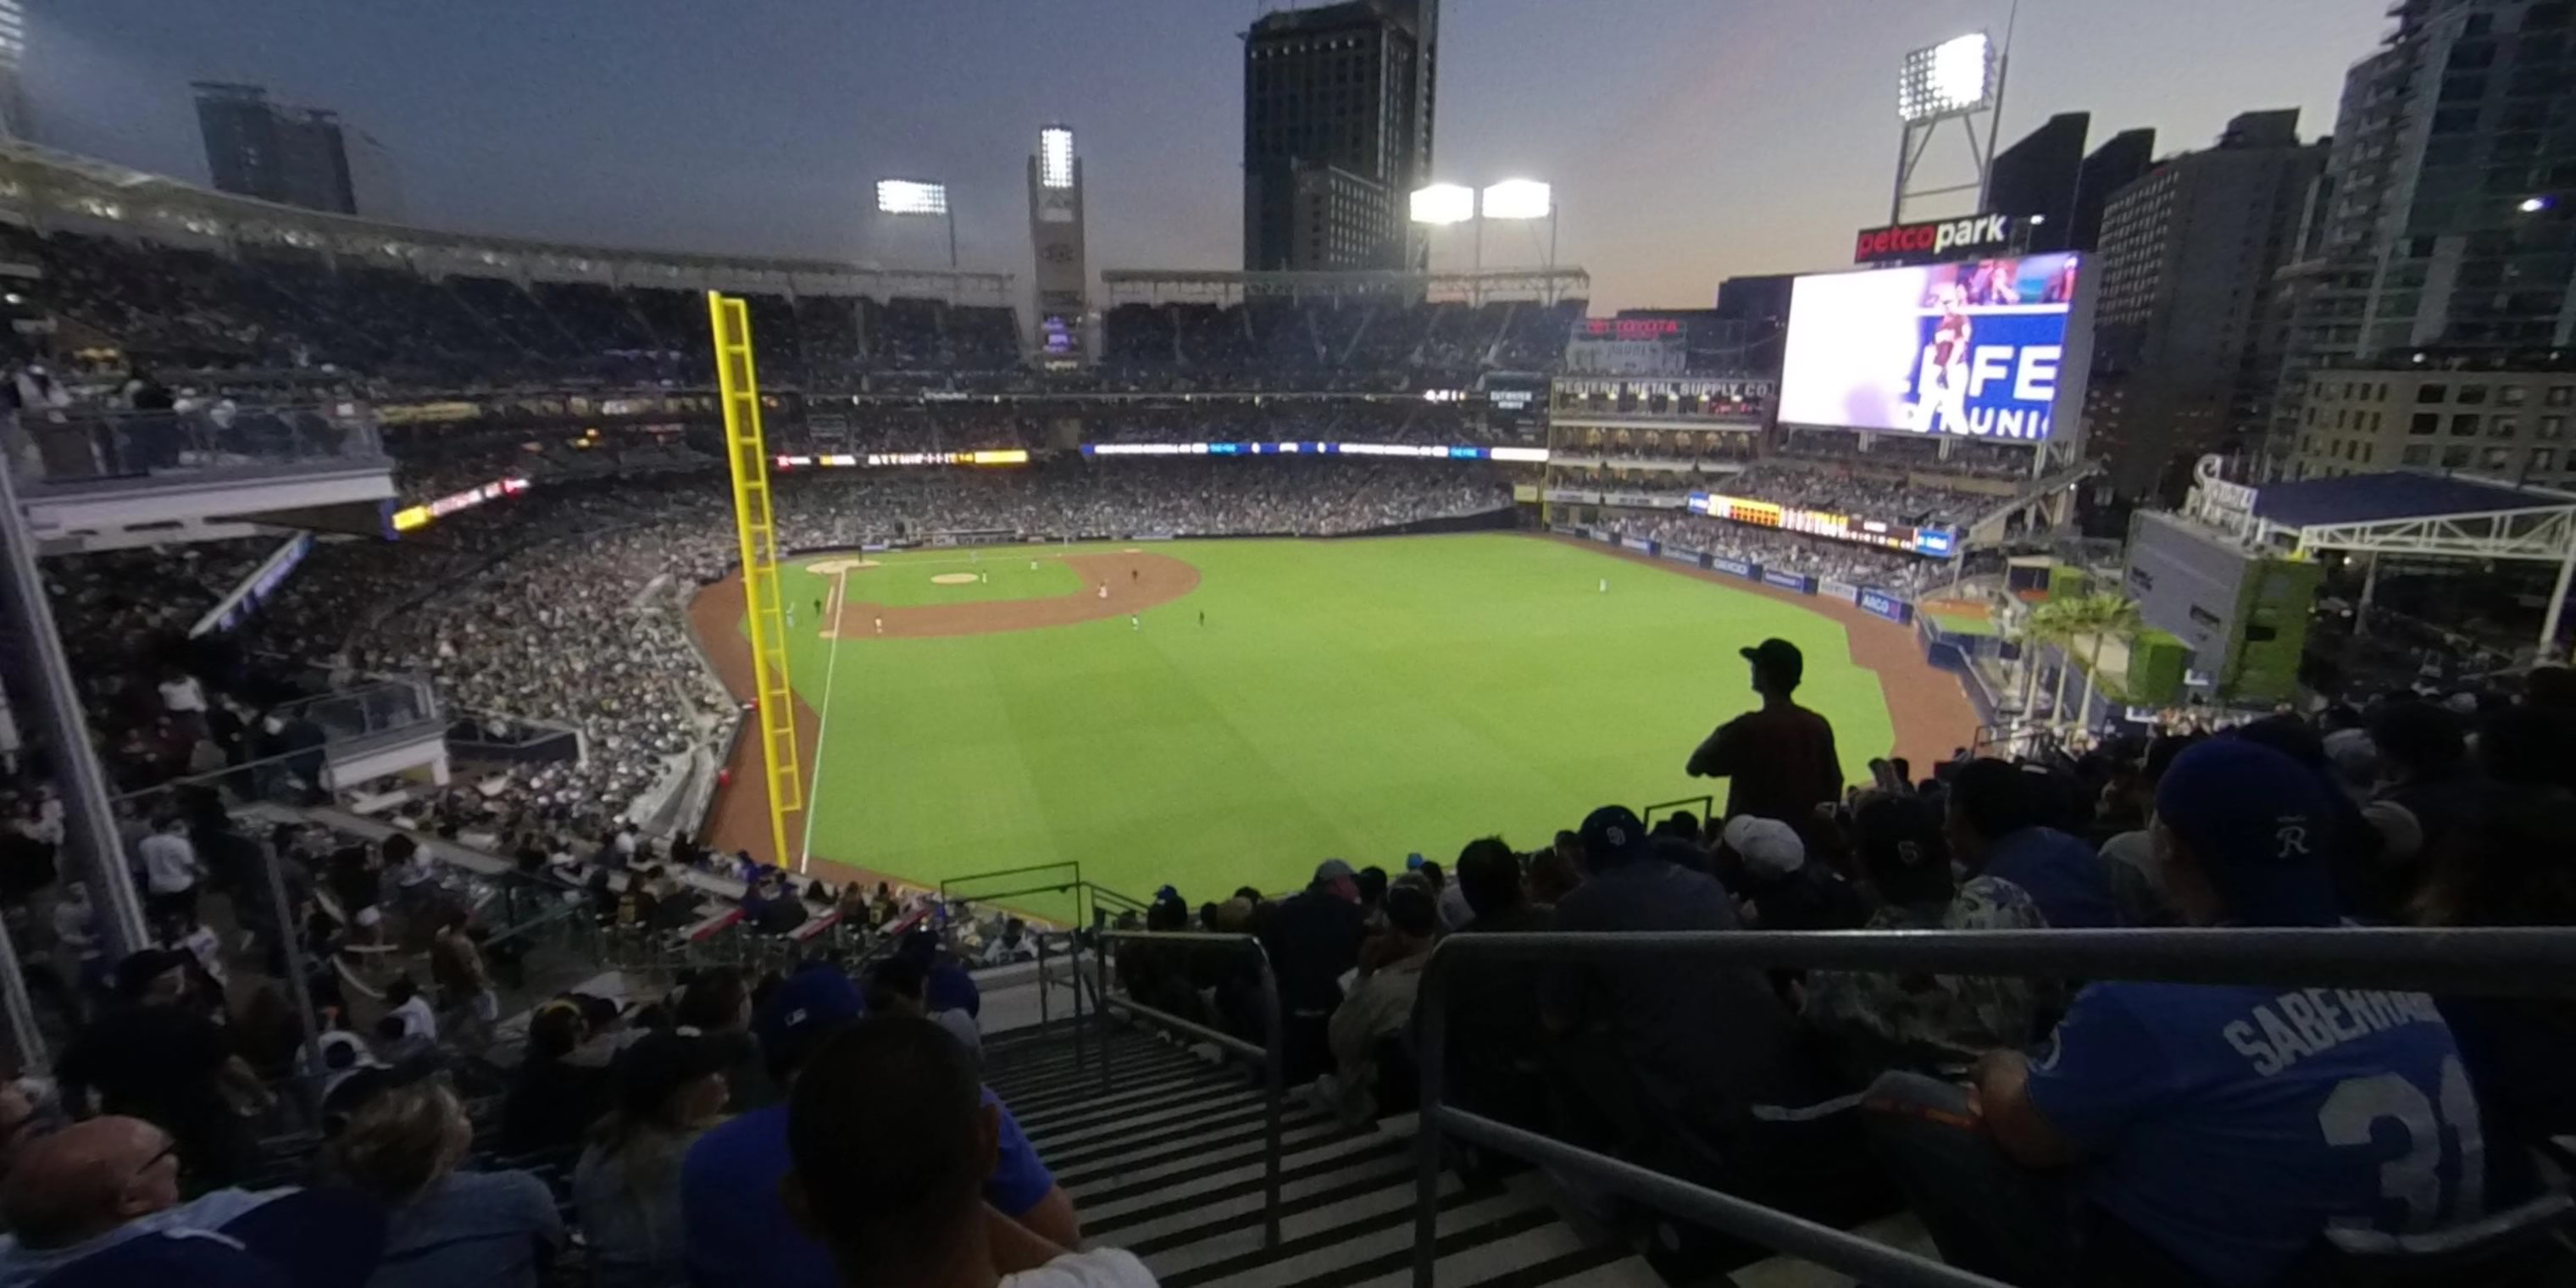 section 227 panoramic seat view  for baseball - petco park